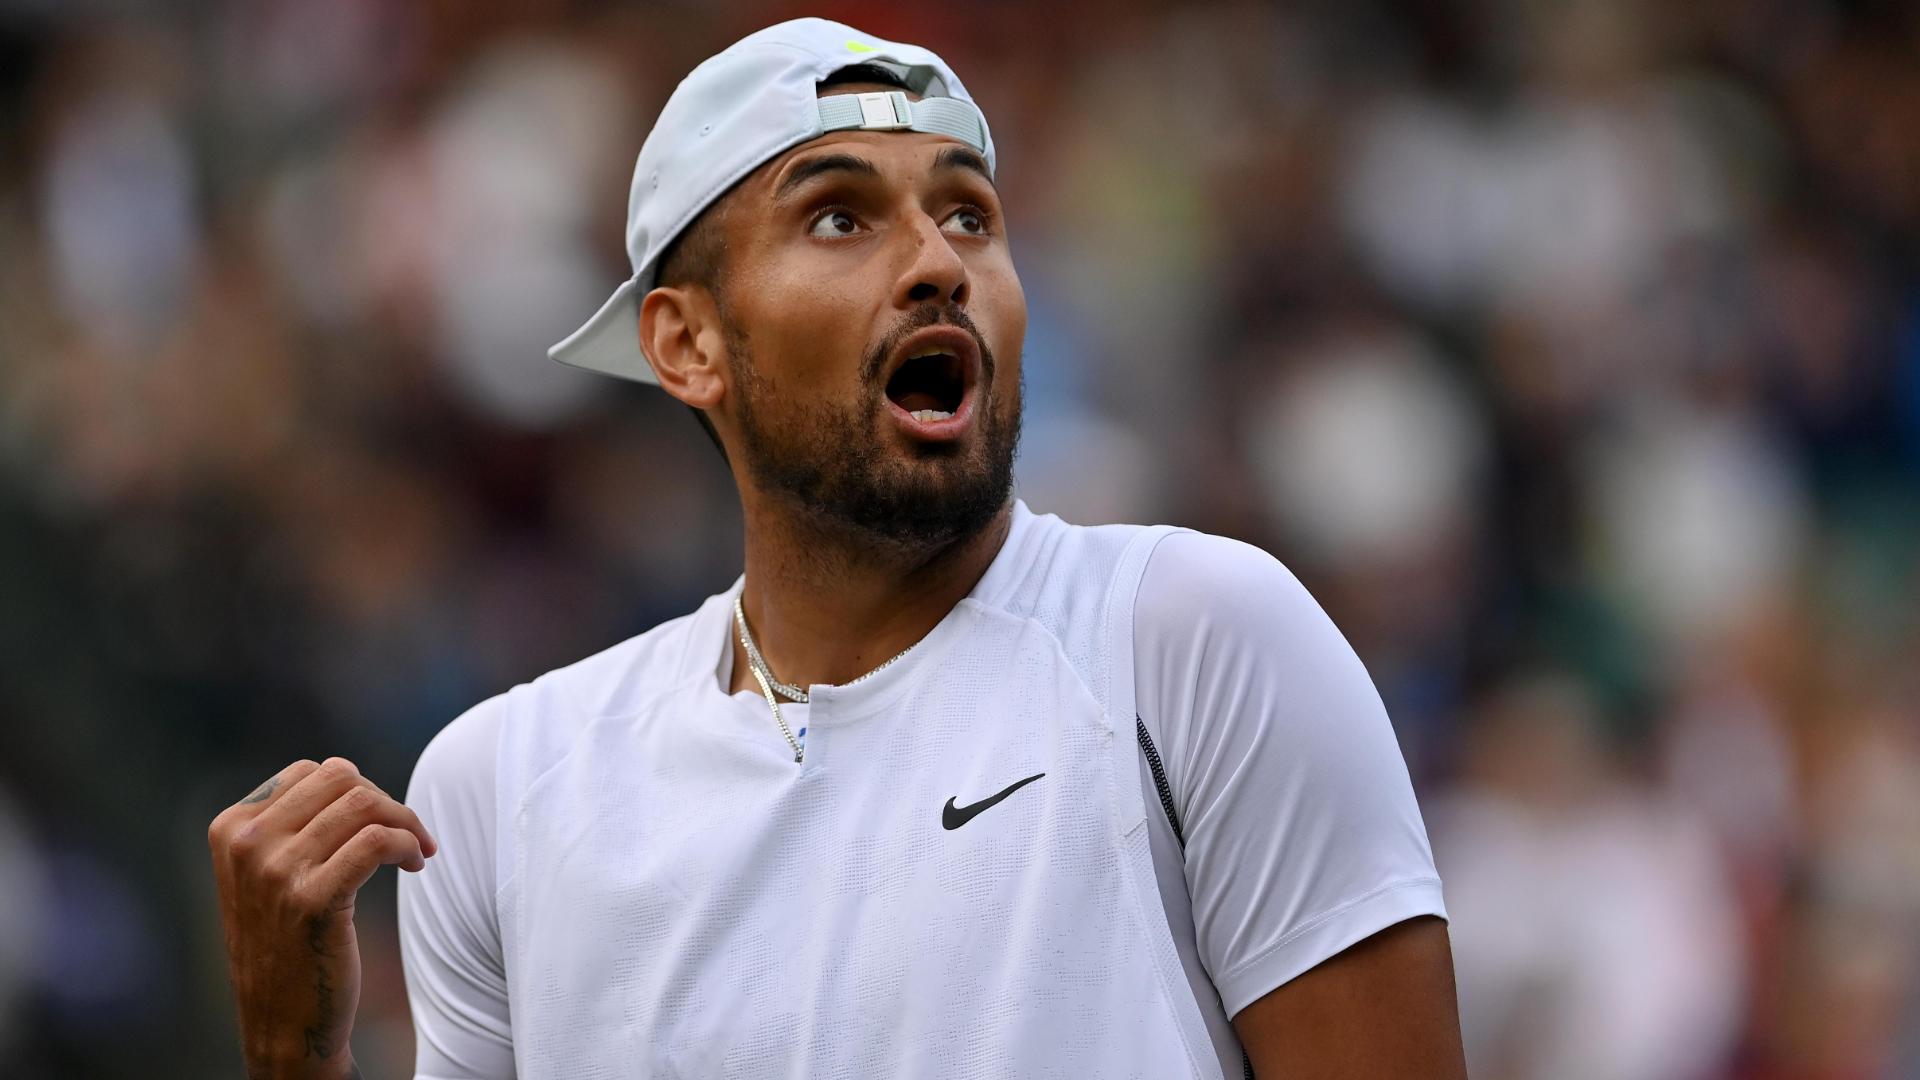 'You're a disgrace!' Kyrgios mad at umps after Tsitsipas not defaulted